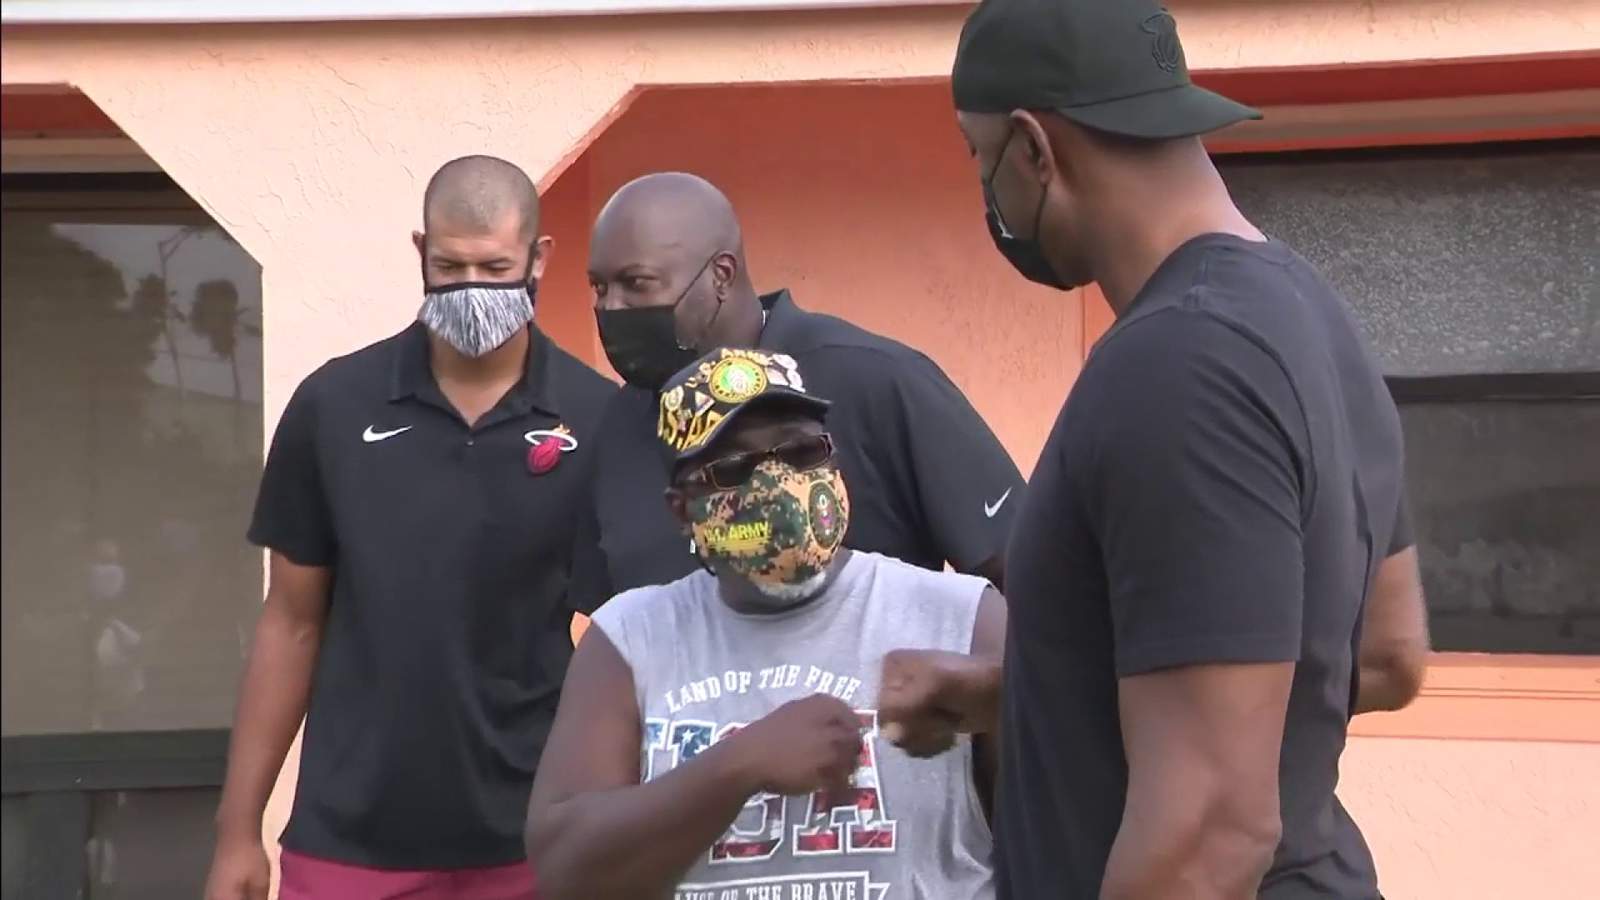 Miami Heat greats show up for a Veterans Day surprise